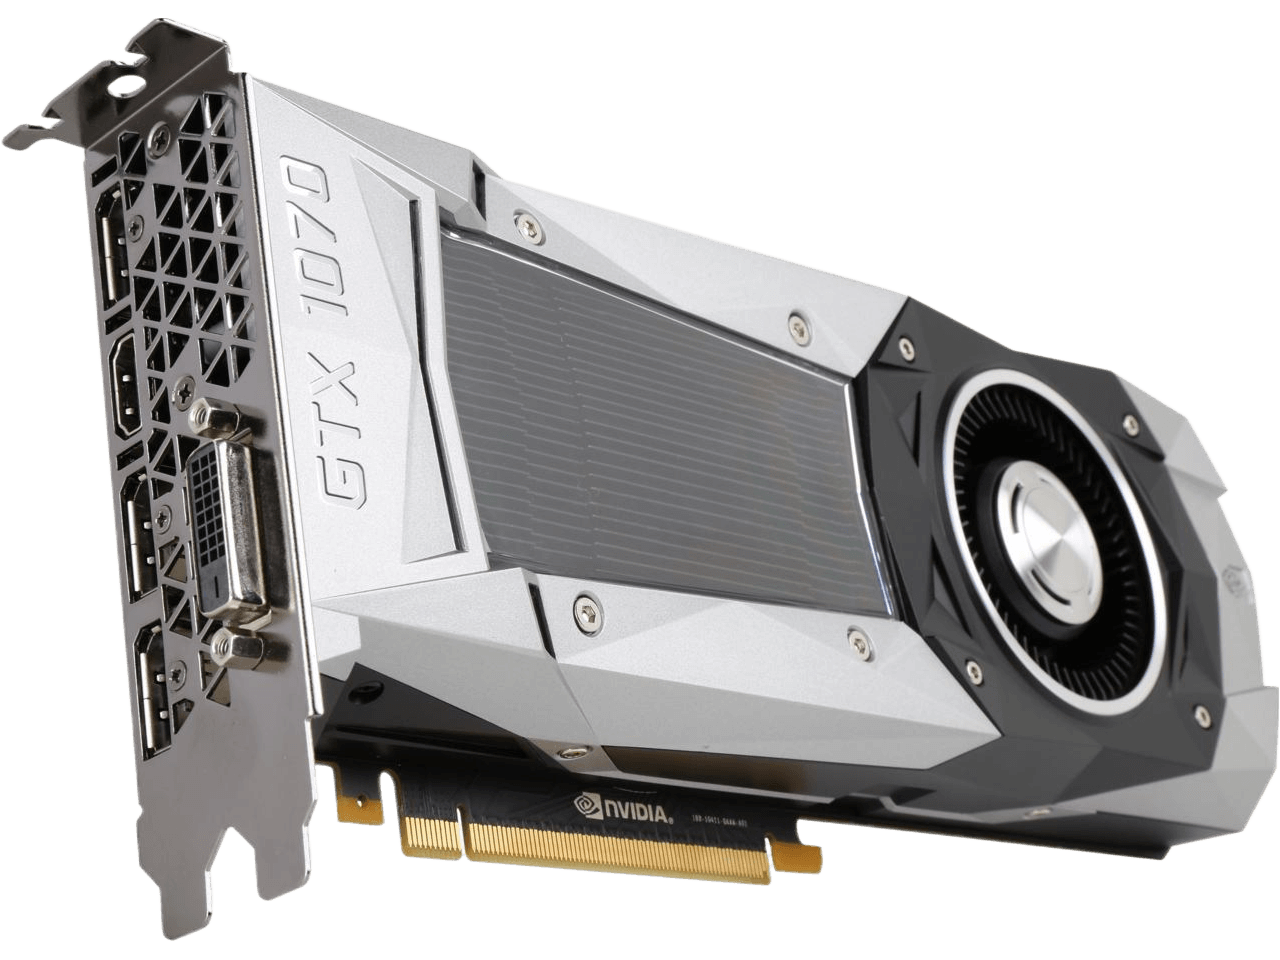 EVGA GeForce GTX 1070 Founders Edition 8GB GDDR5 LED DX12 OSD Support Graphics Card 08G-P4-6170-KR